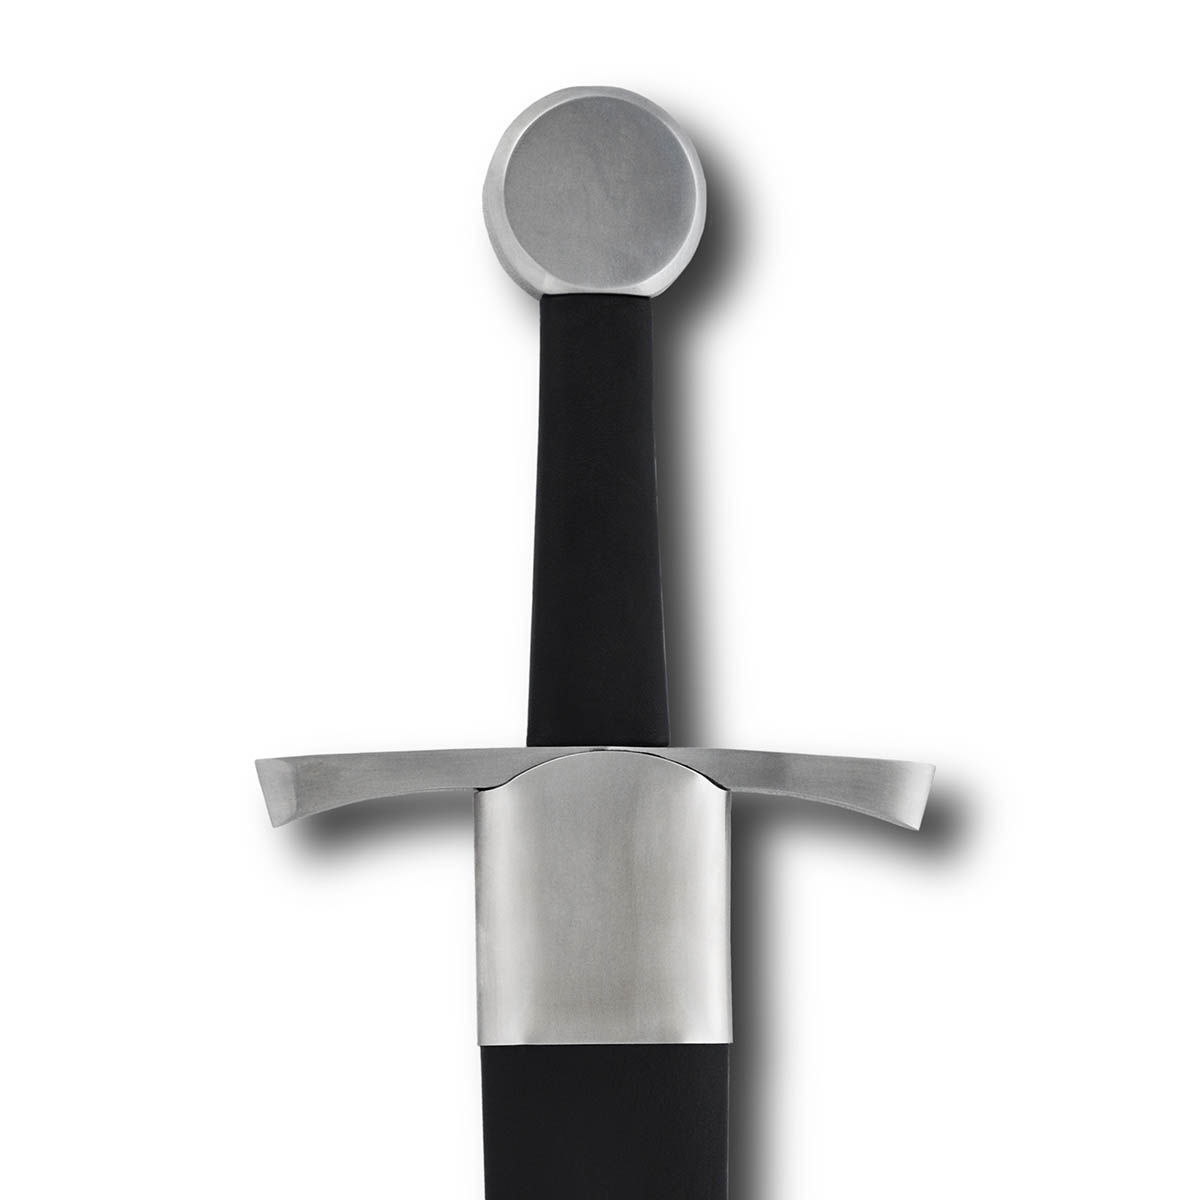 The Hanwei / Tinker Sharp Early Medieval Sword has a cruciform hilt and includes scabbard